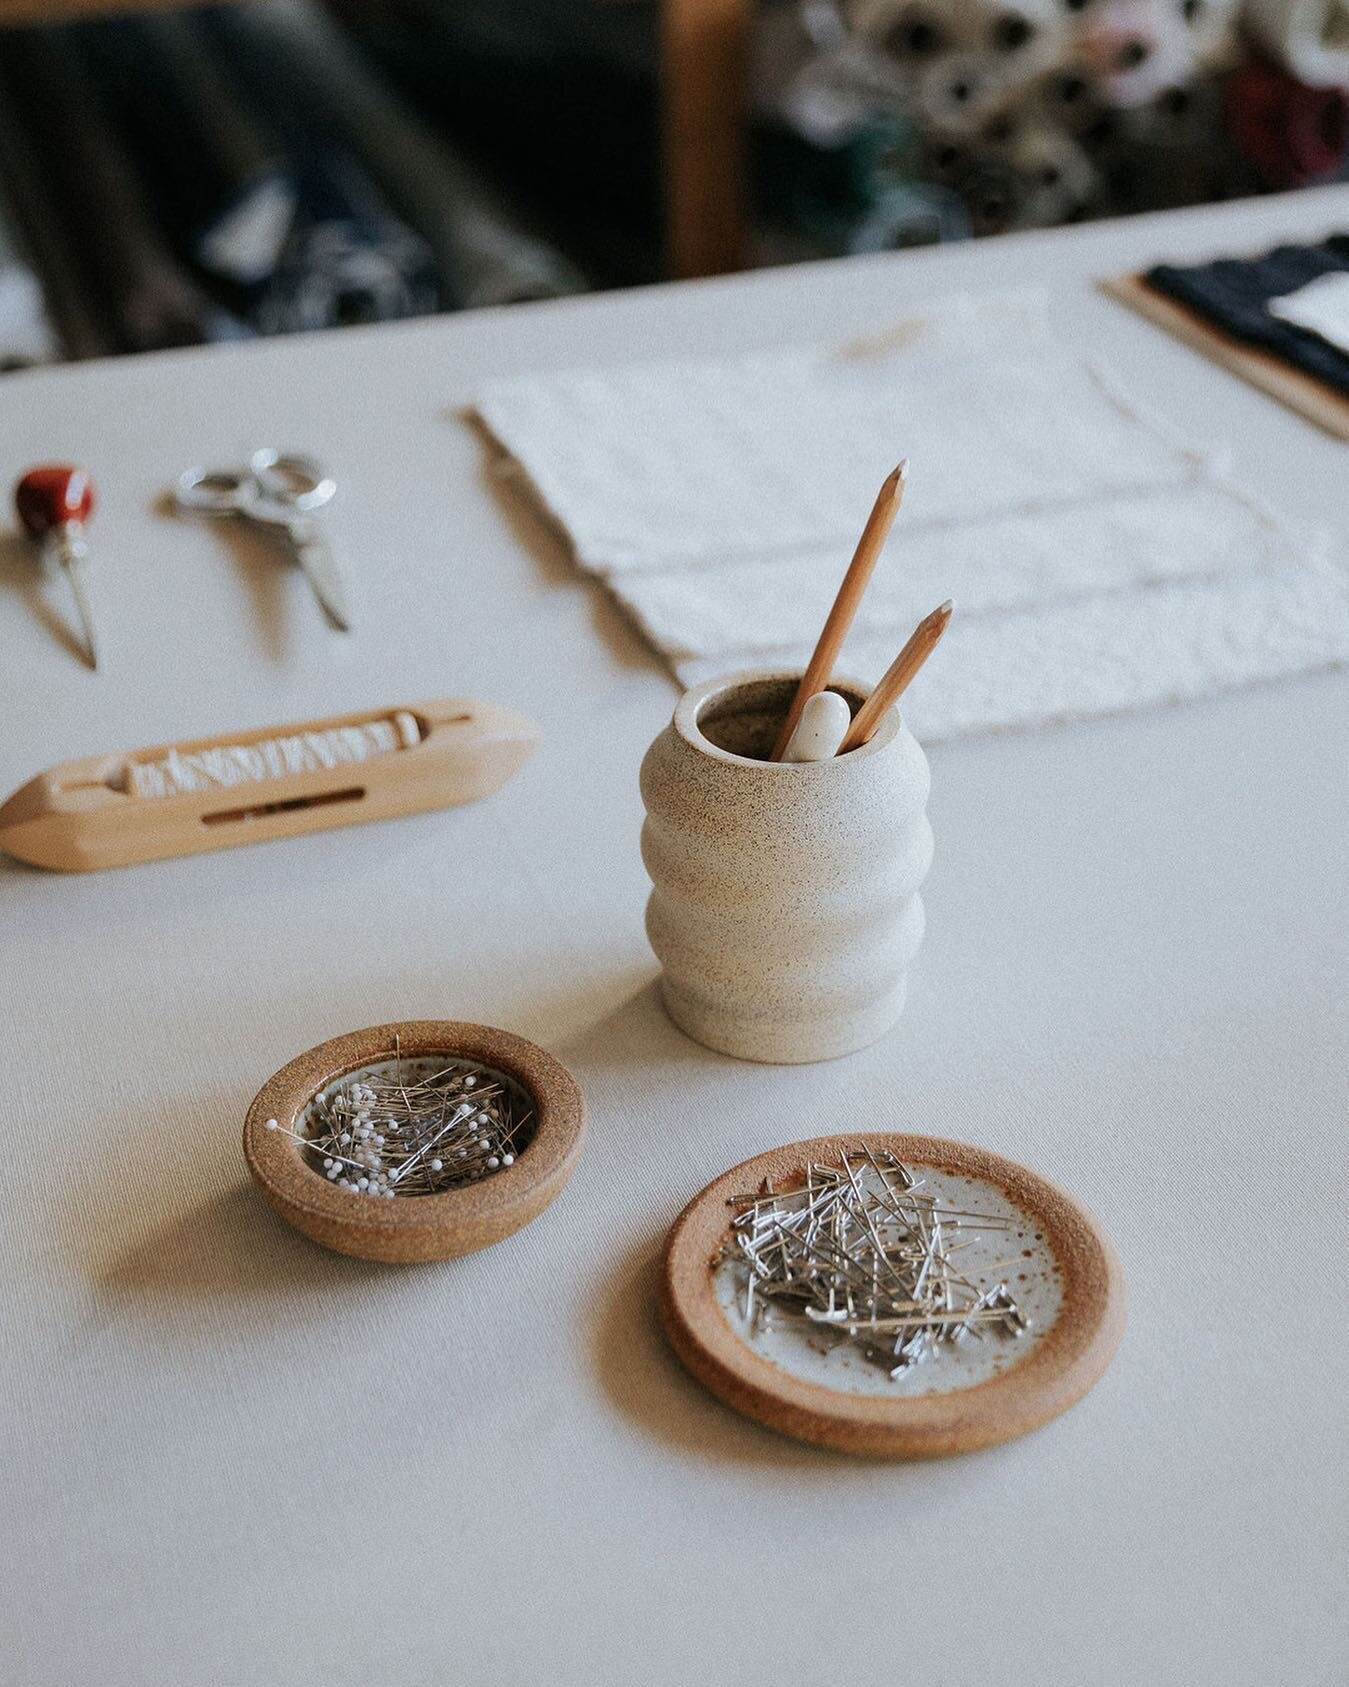 Our focus is on creating thoughtful and sustainable pieces, using natural fibers, like cotton and hemp, crafted by people who truly care about what they're making.